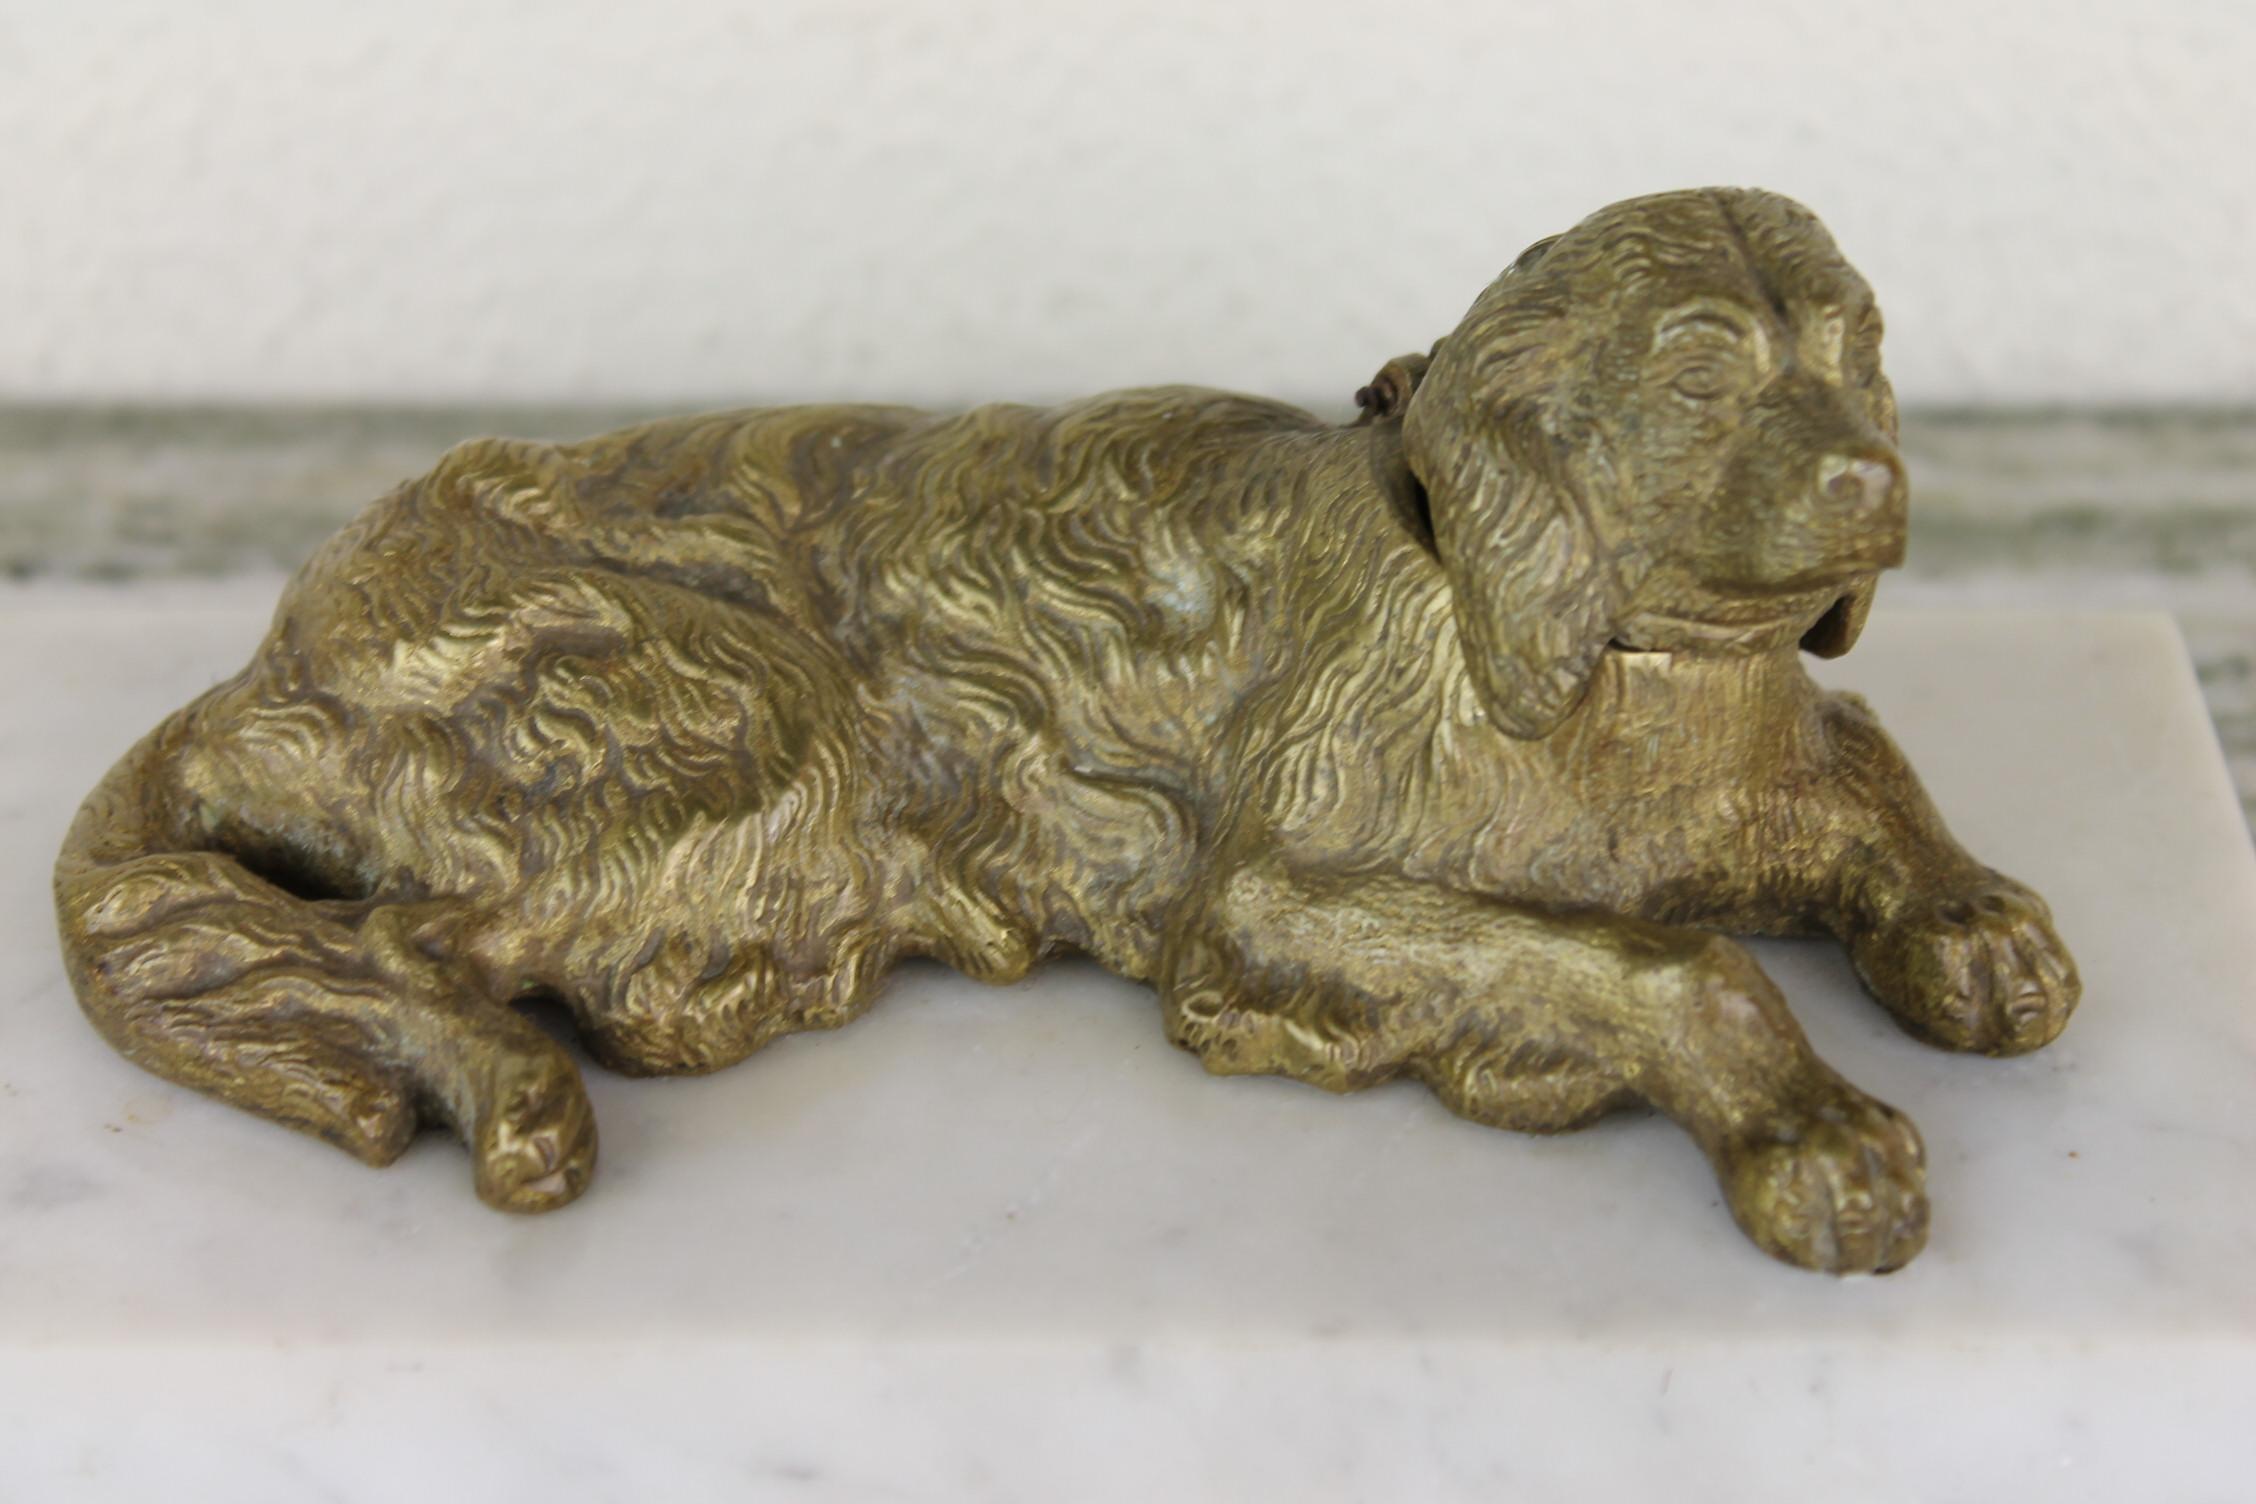 Art Deco Inkwell with Irish Setter Dog. 
This Inkstand has a Marble Base, a bronze Irish Setter Sculpture and a copper and tin well - inkwell. 
This Desk accessory with a sporting-dog - hunting dog will look great in your interior. 

Irish Setter